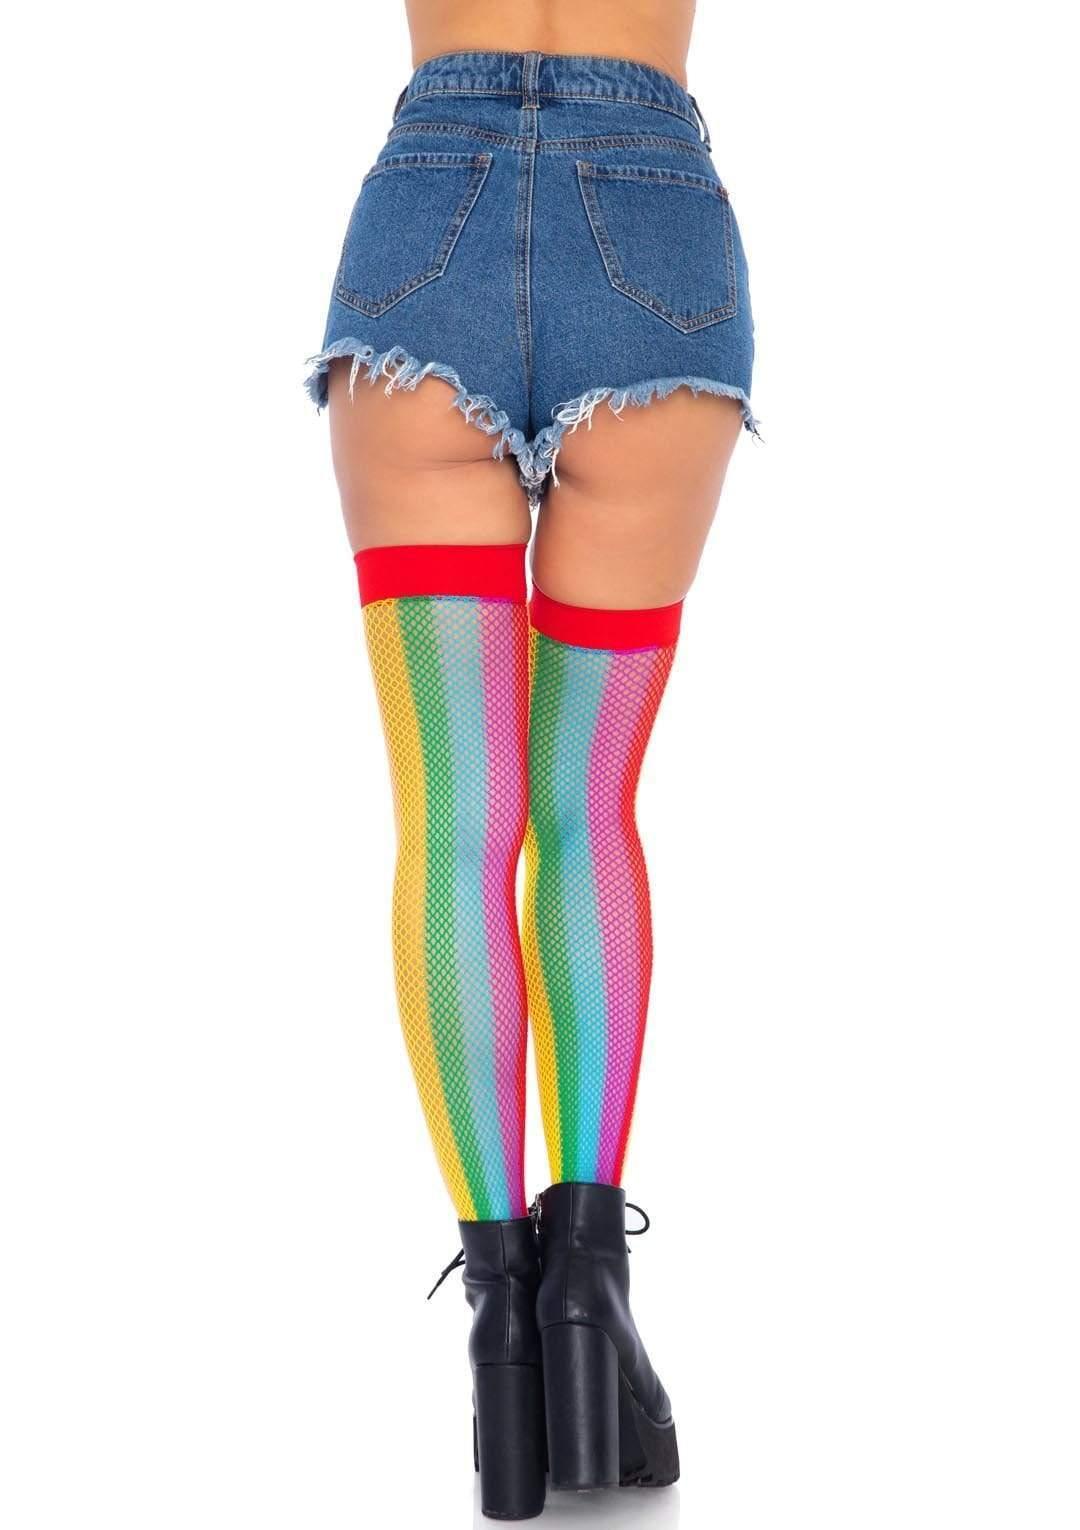 Rainbow Fishnet Thigh Highs - One Size - Multicolor - My Sex Toy Hub